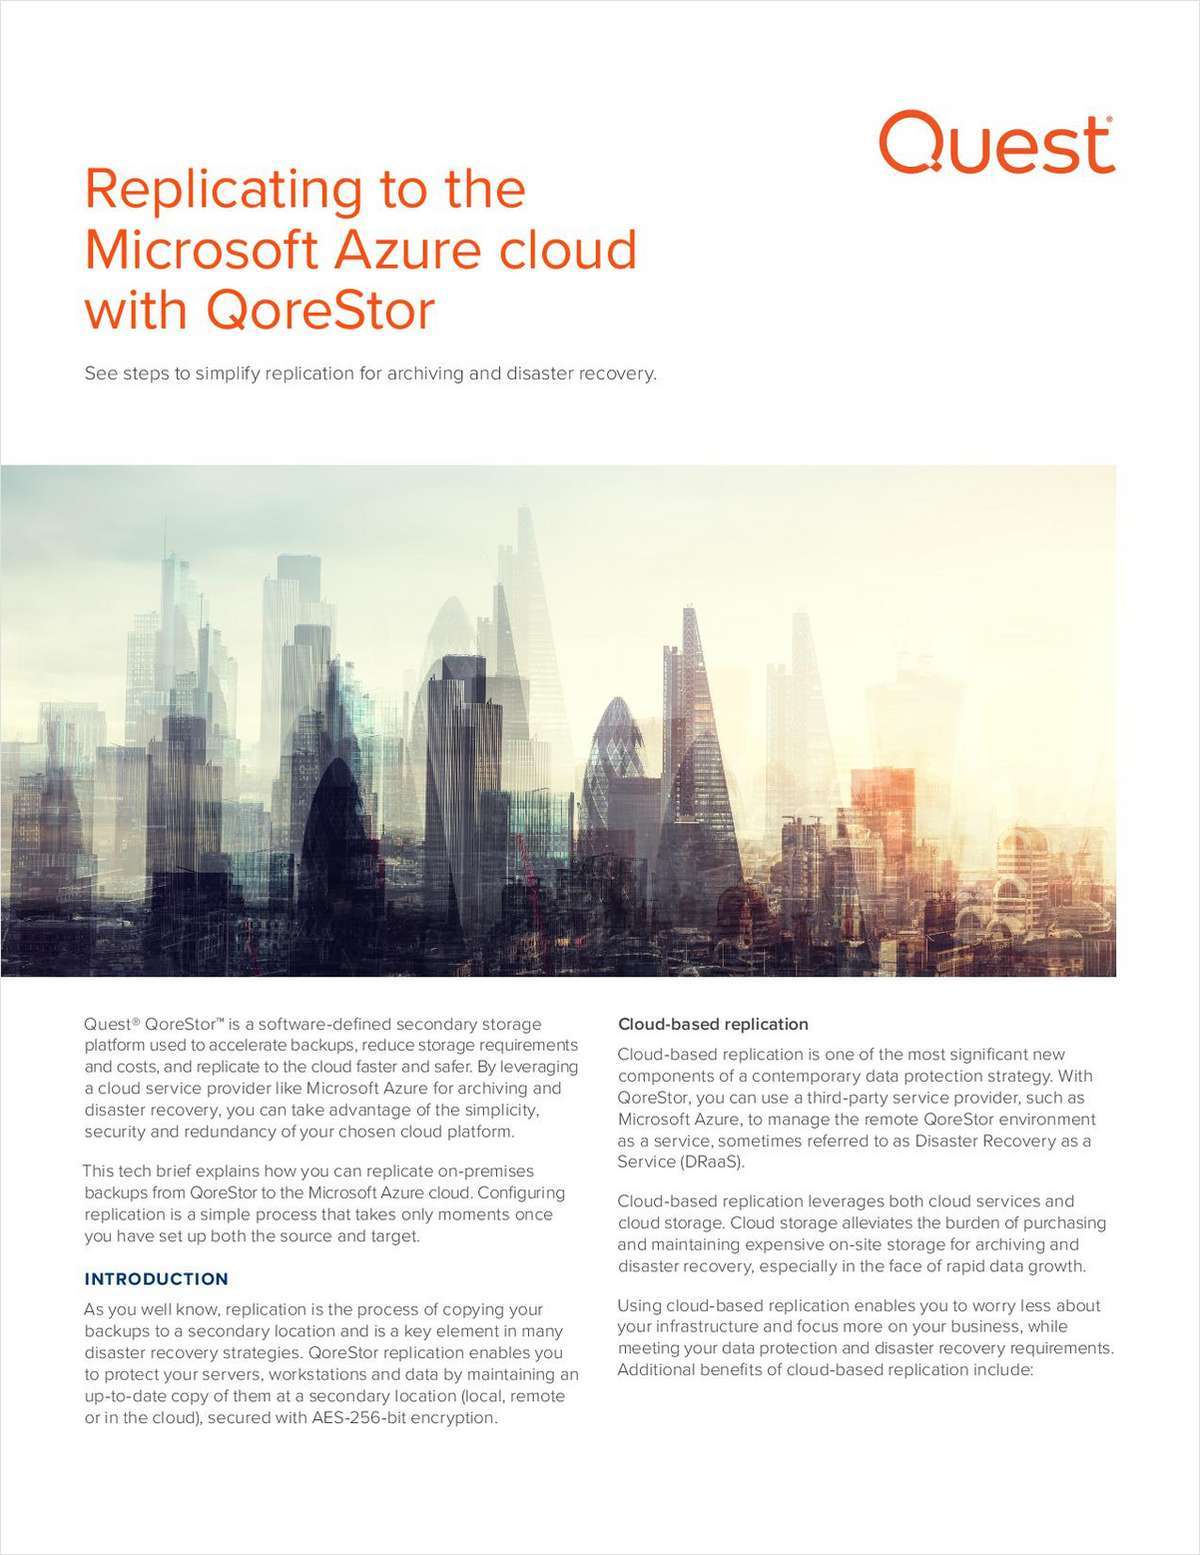 Replicating to the Microsoft Azure cloud with Qorestor